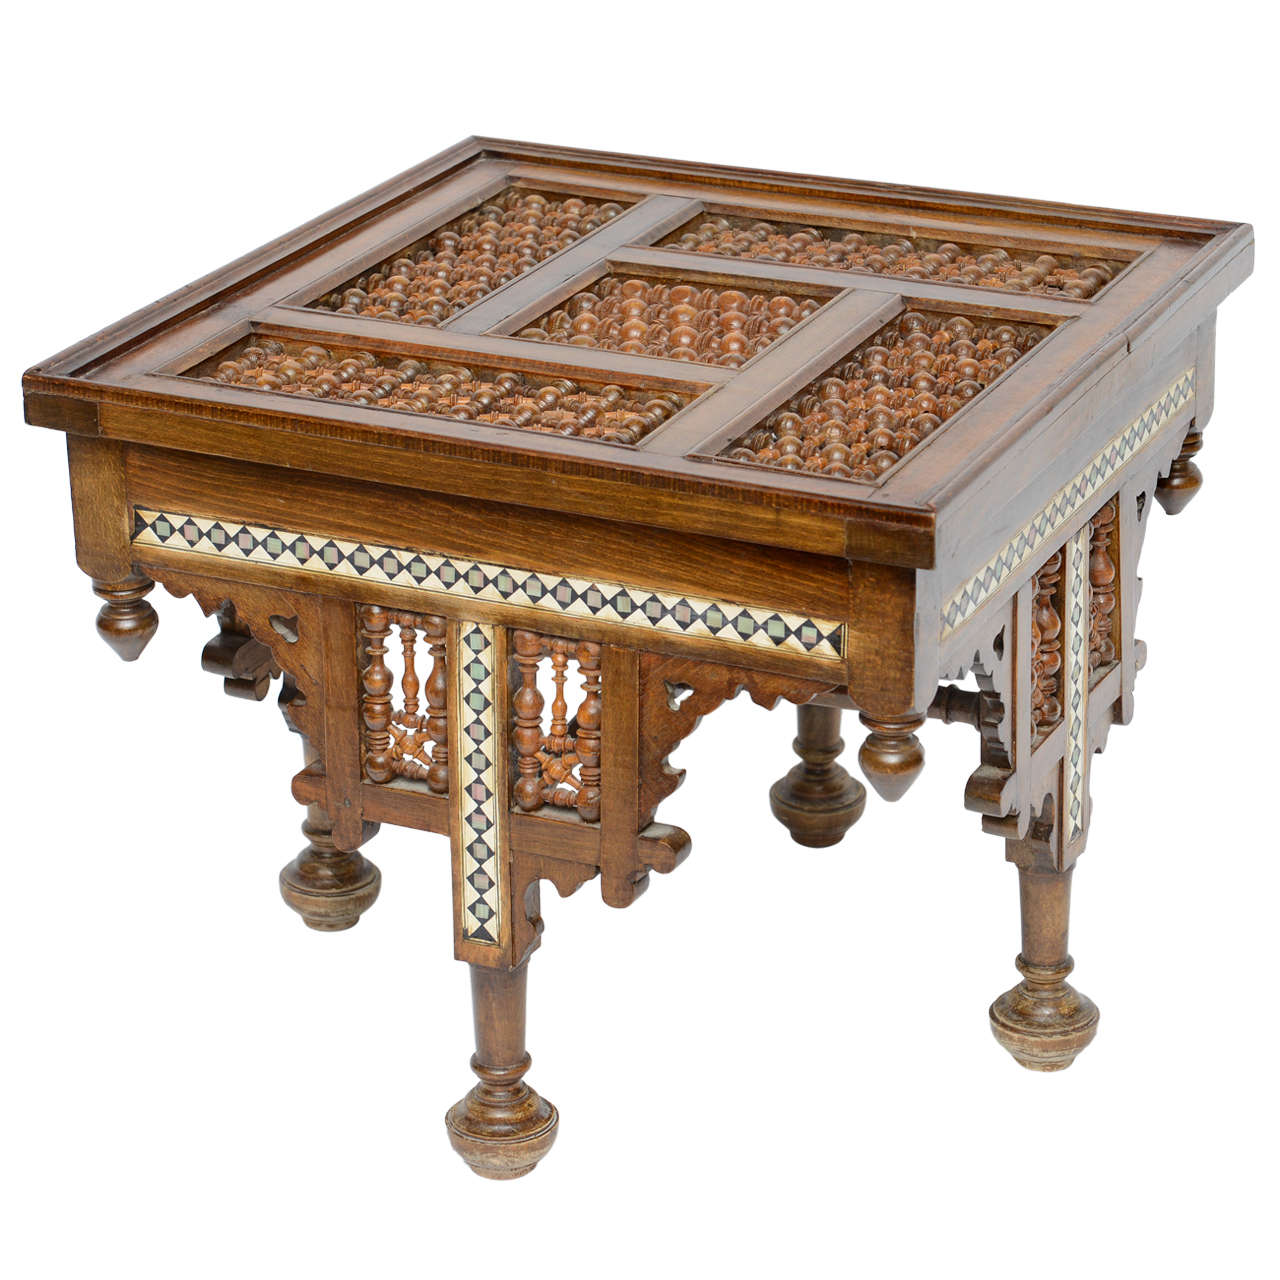 Moroccan Table Inlaid with Bone & Ivory, 19th Century